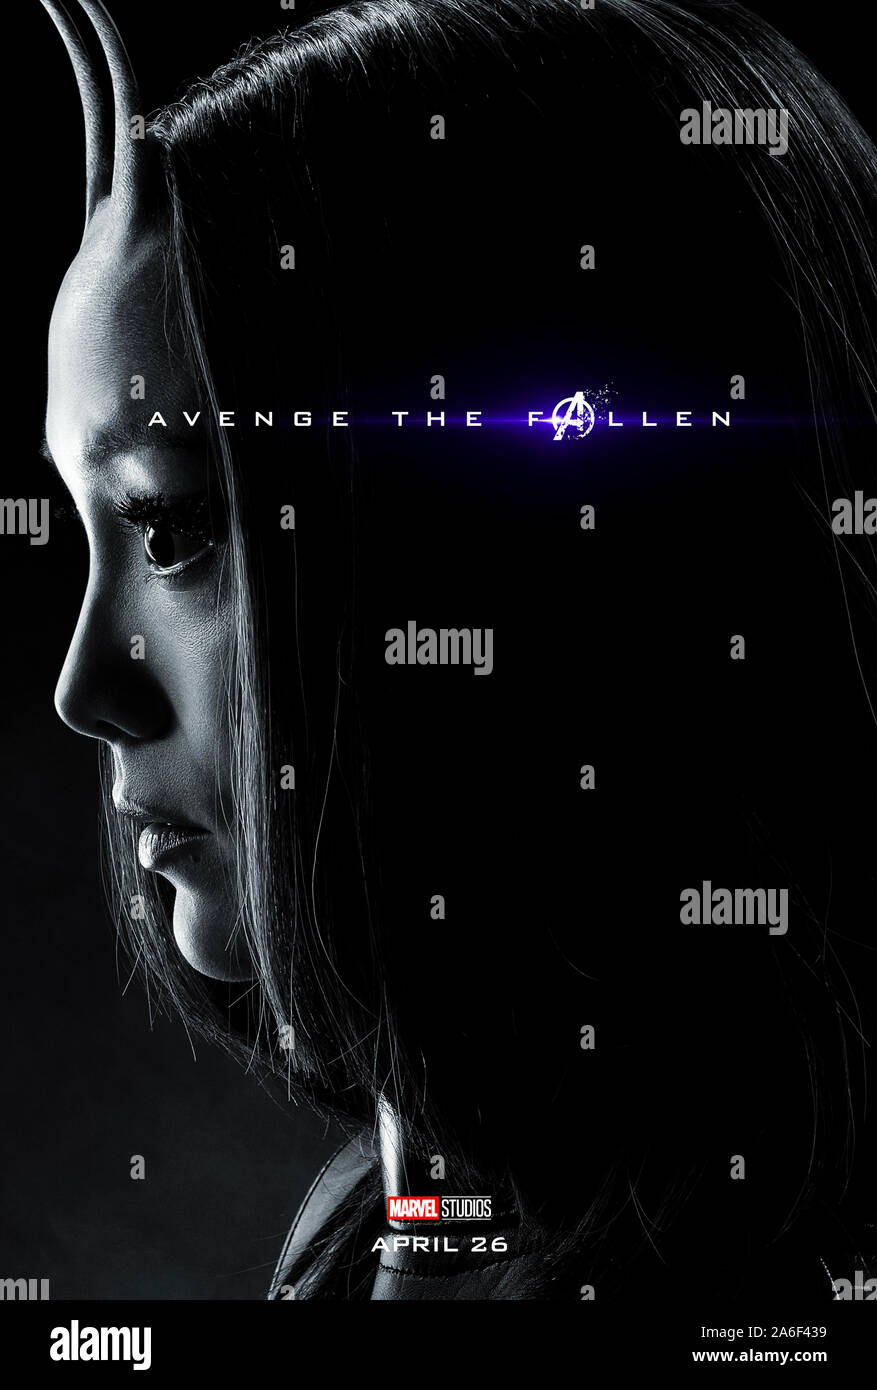 Character advance poster for Avengers: Endgame (2019) directed  by Anthony and Joe Russo starring Pom Klementieff as Mantis. The epic conclusion and 22nd film in the Marvel Cinematic Universe. Stock Photo